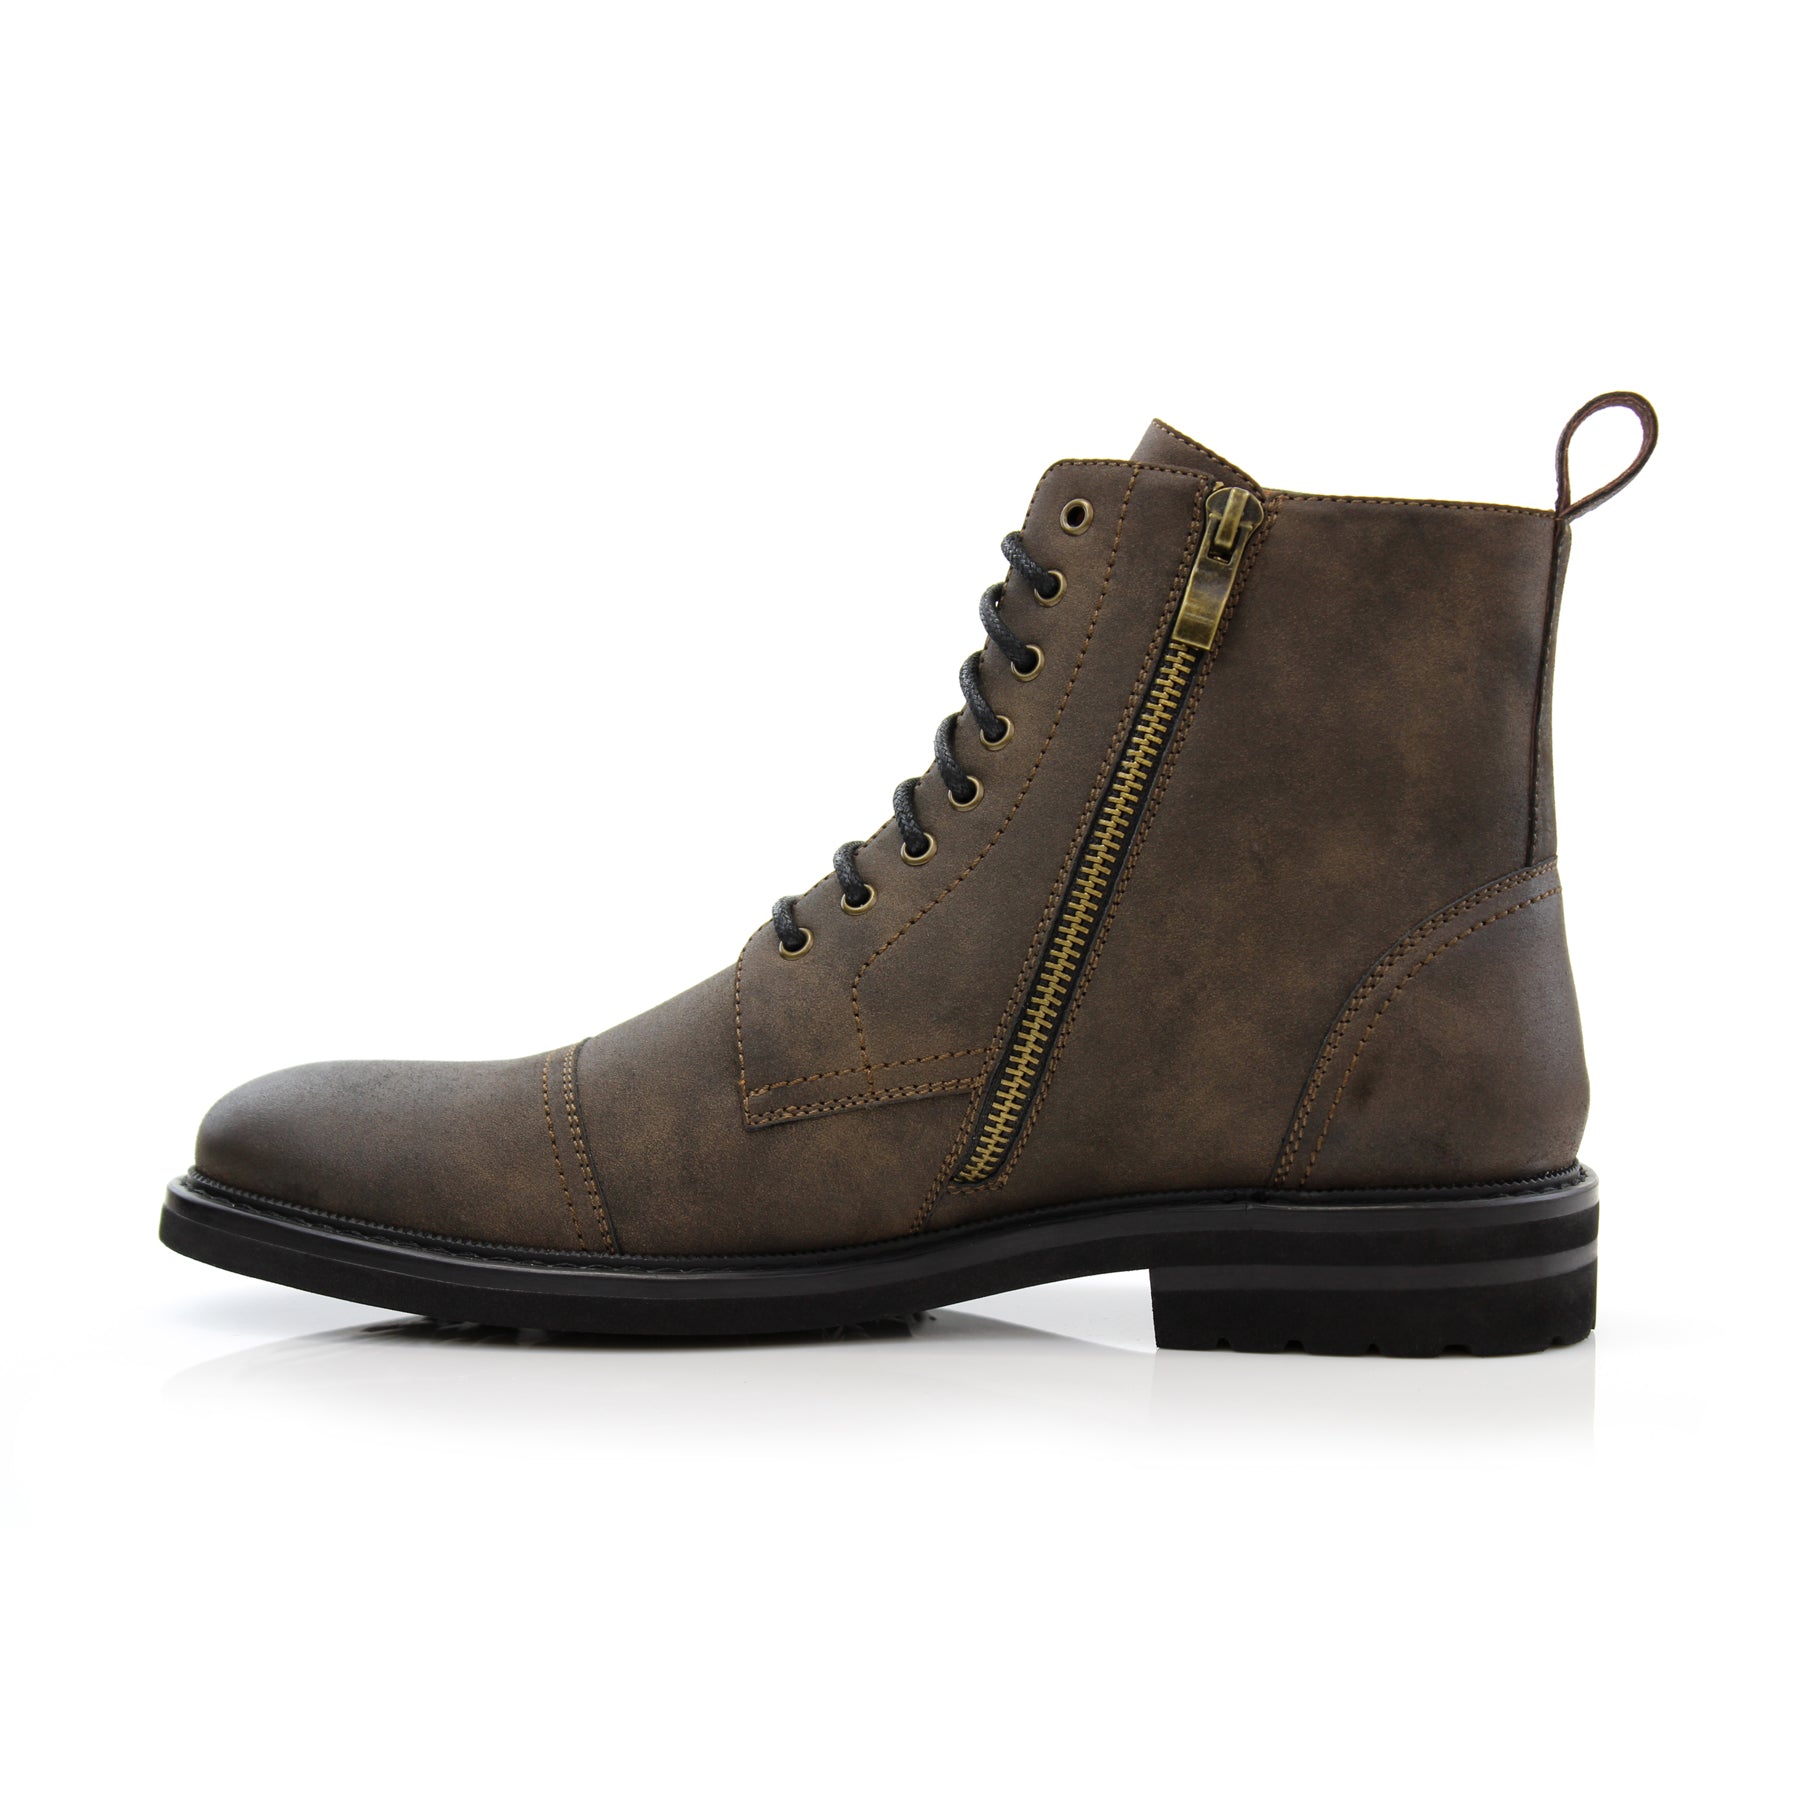 Cigar Faux Burnished Leather Boots With Zipper Closure | Polar Fox 